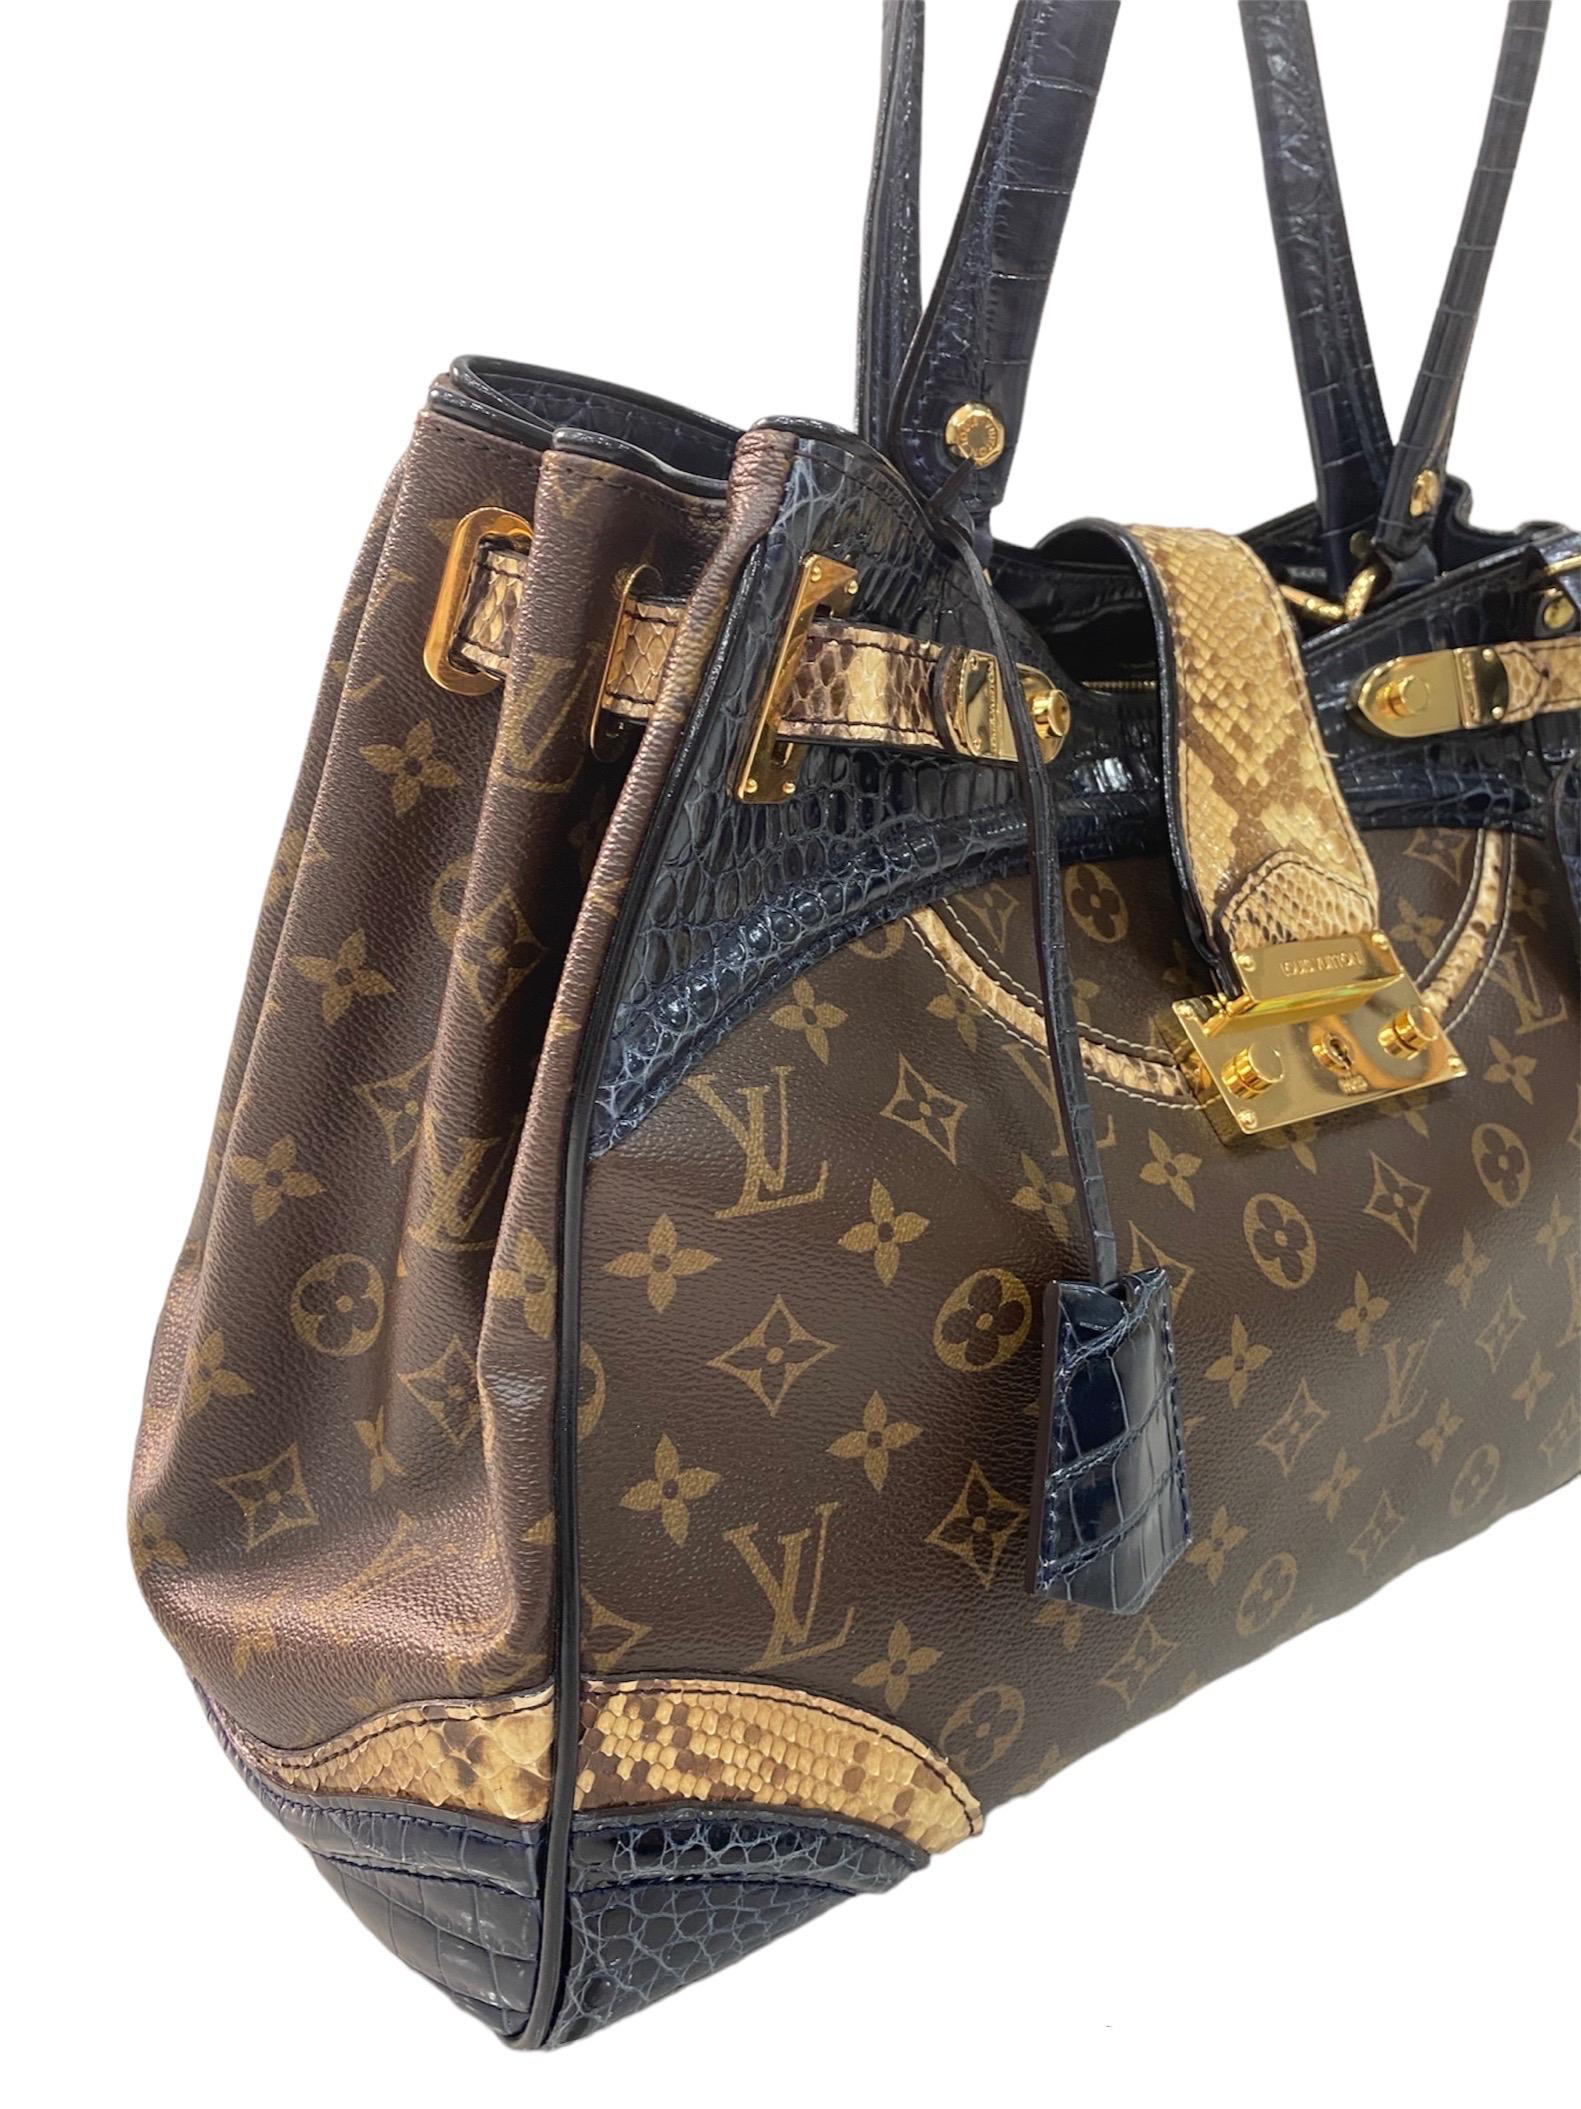 Louis Vuitton limited edition bag, Monogrammissime line, made of monogram canvas, with crocodile and python inserts, and with golden hardware.

Equipped with a central locking with interlocking, internally lined in blue suede, very roomy.

Equipped